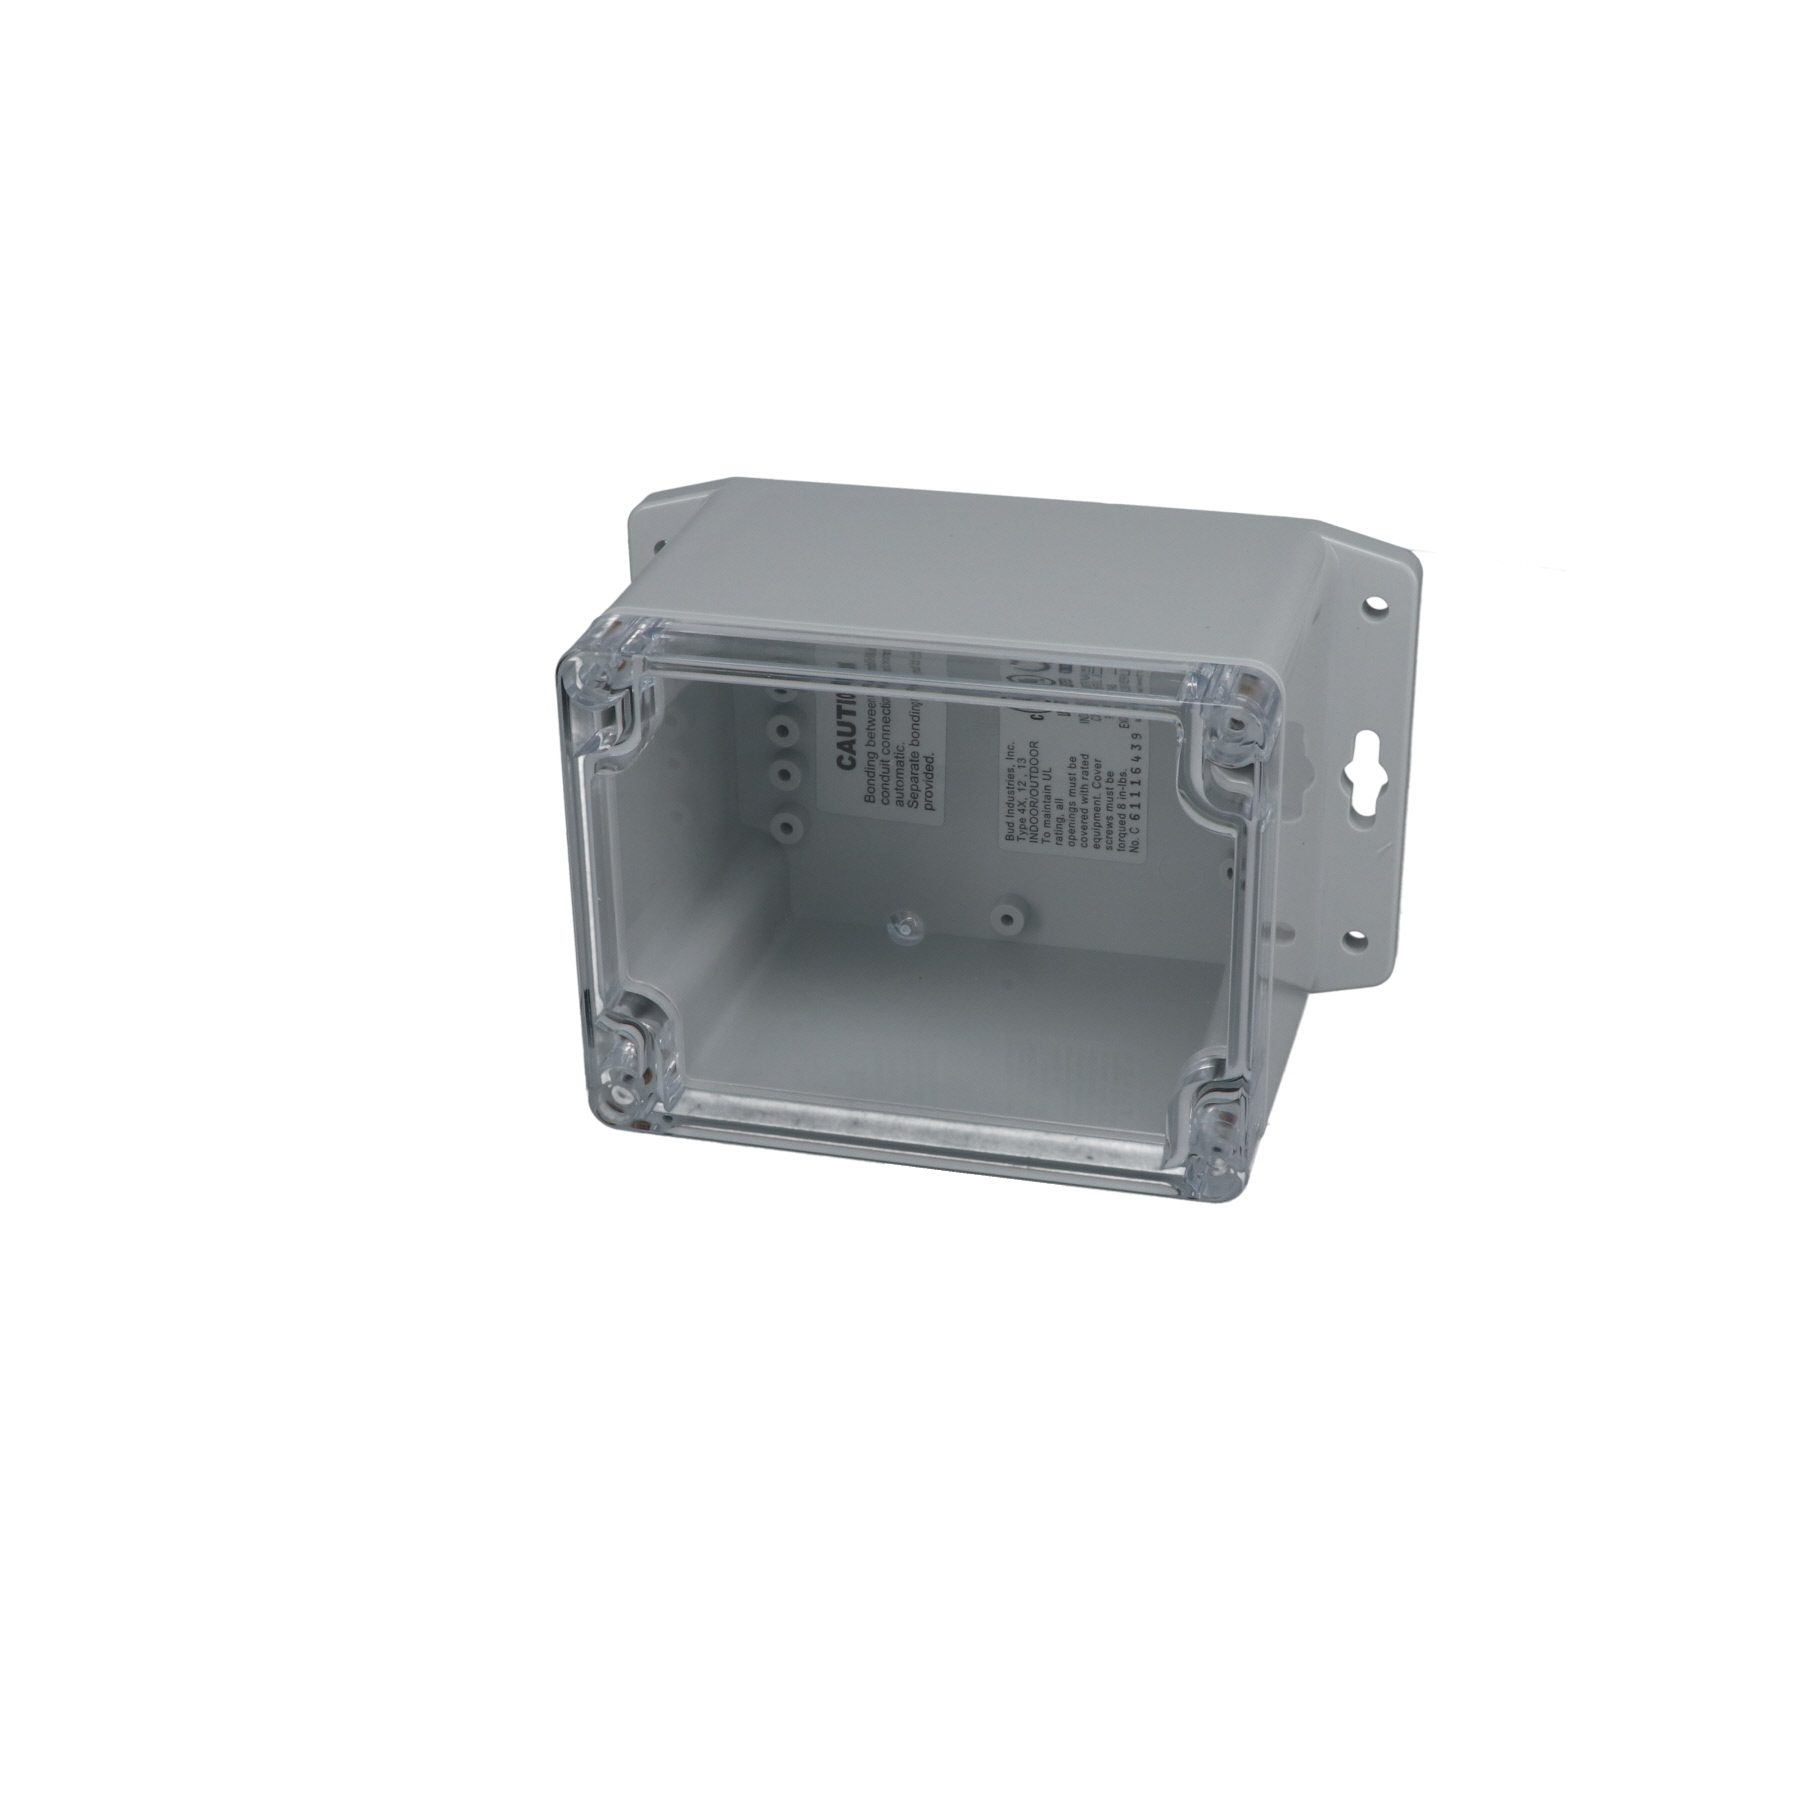 IP65 NEMA 4X Box with Clear Cover and Mounting Brackets PN-1328-CMB